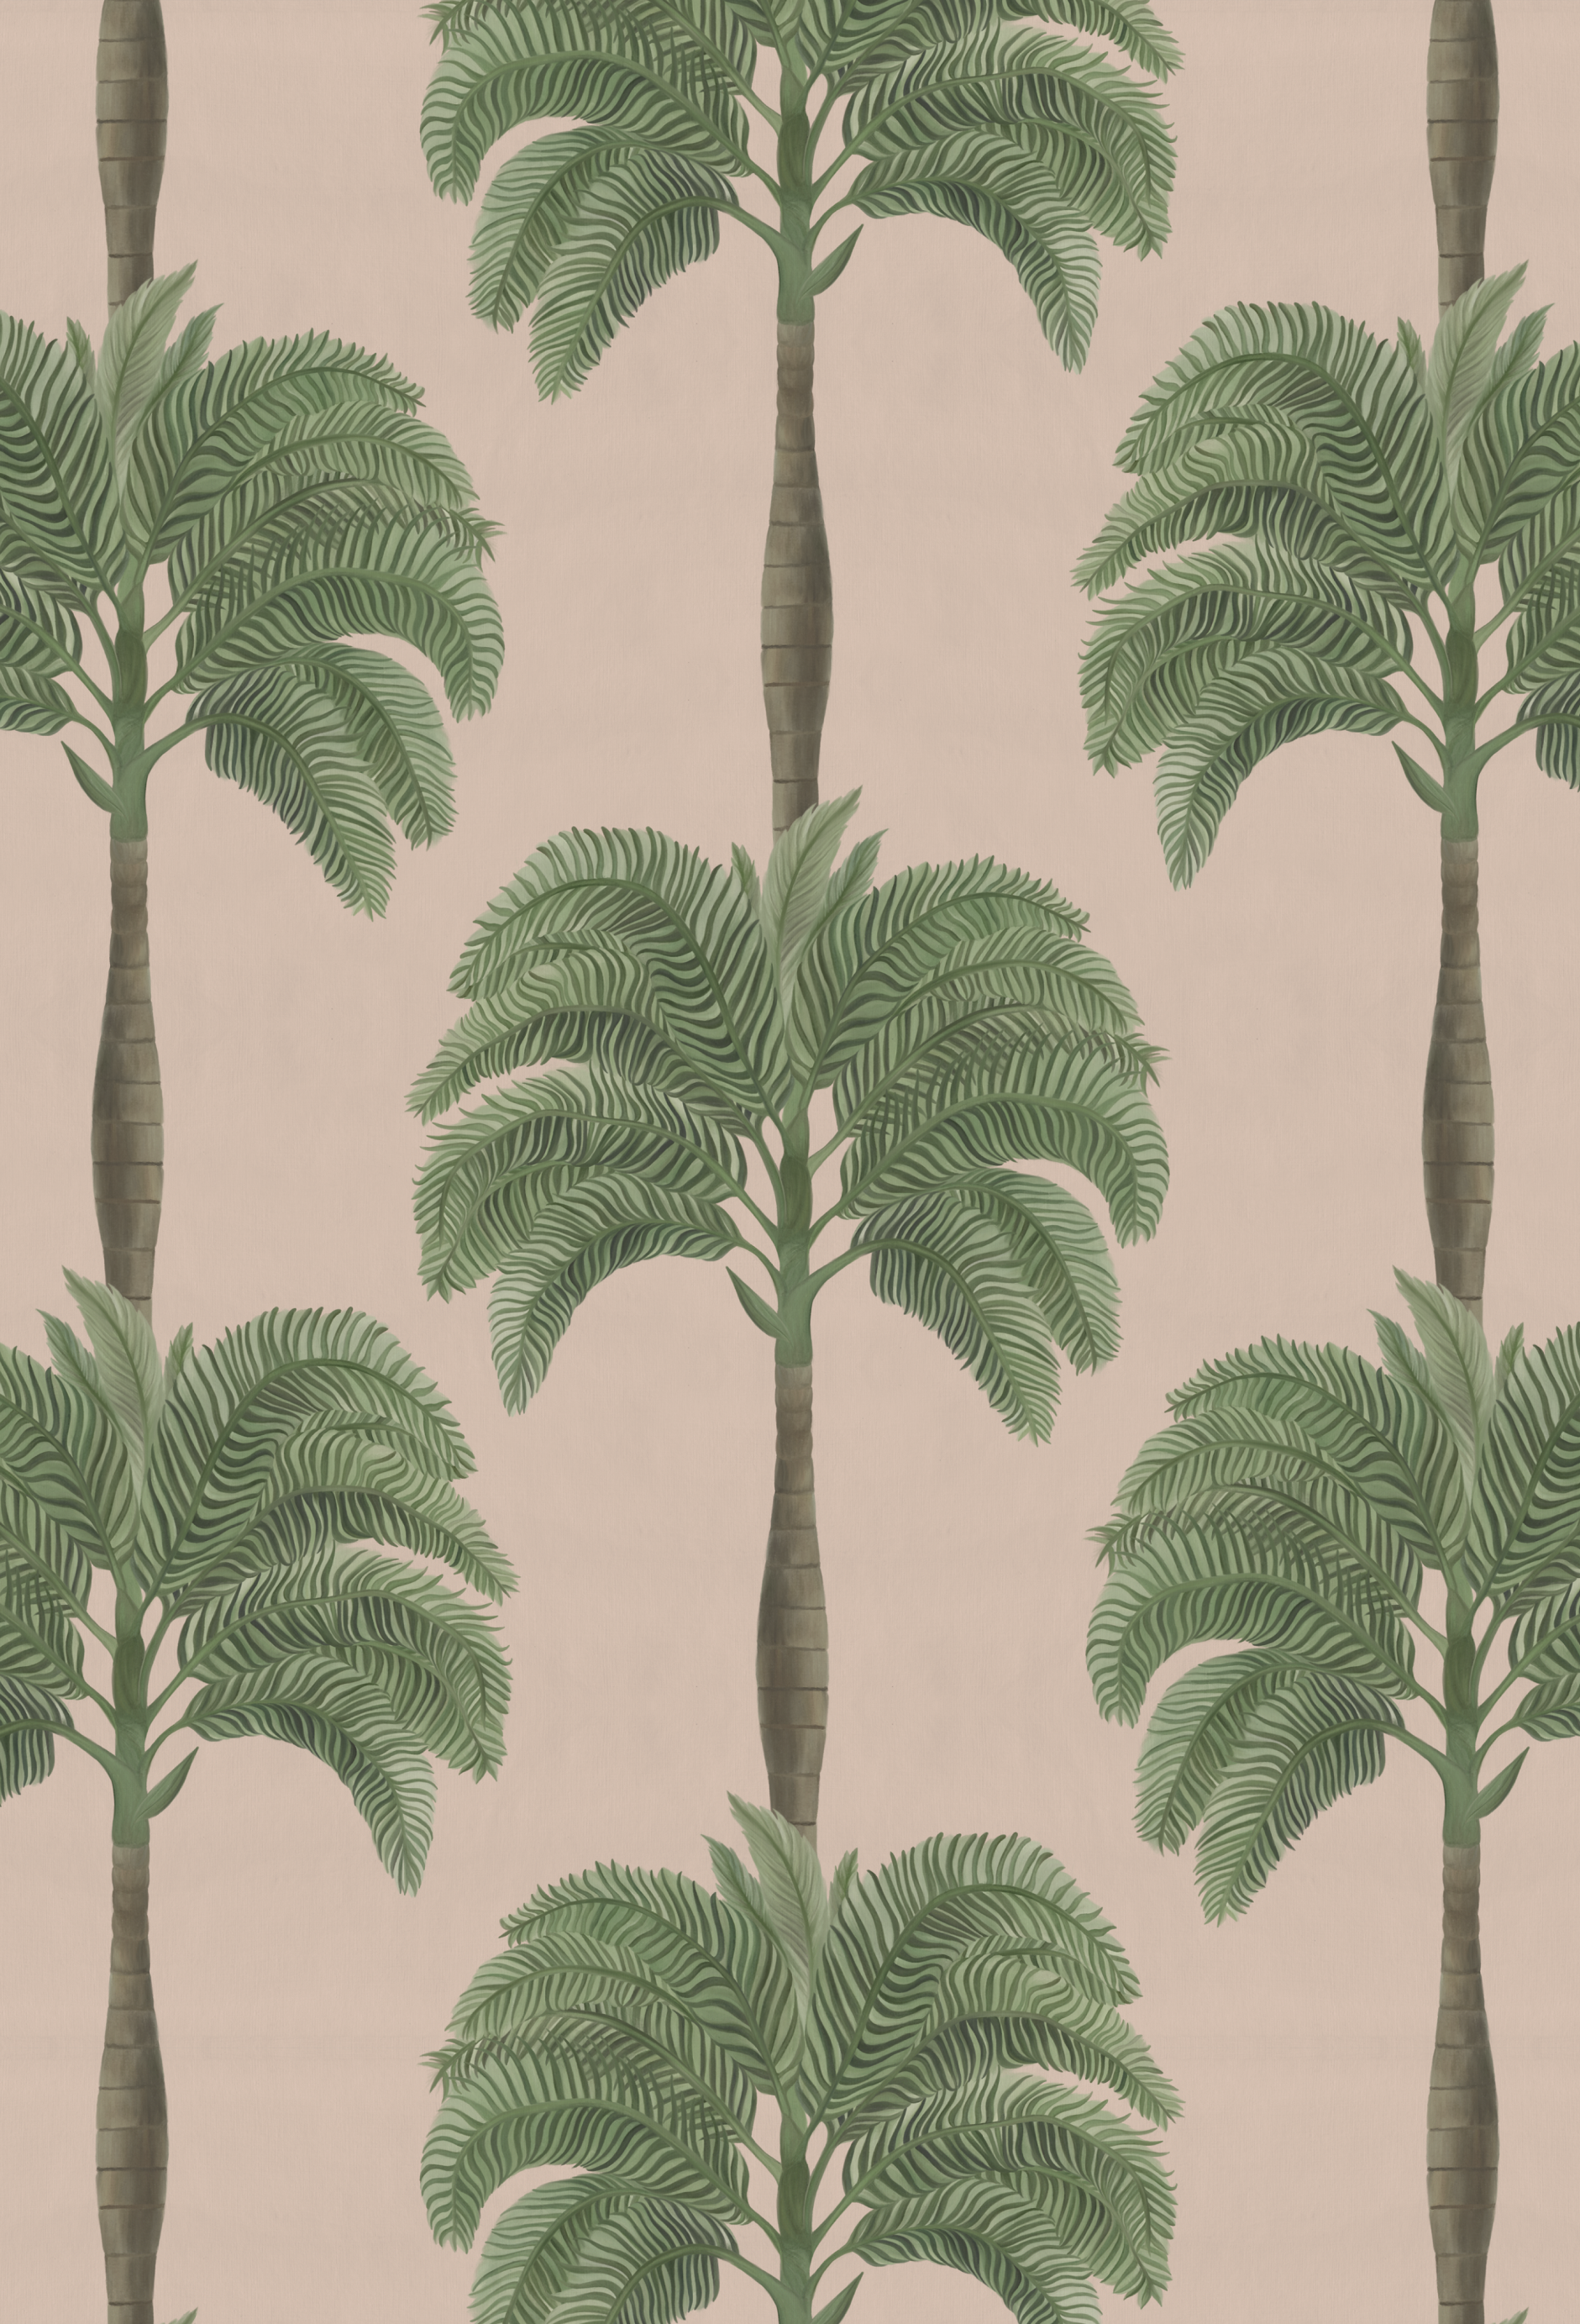 Palm tree striped wallpaper of Palma Collection in pink 'Flamingo' from Deus ex Gardenia.